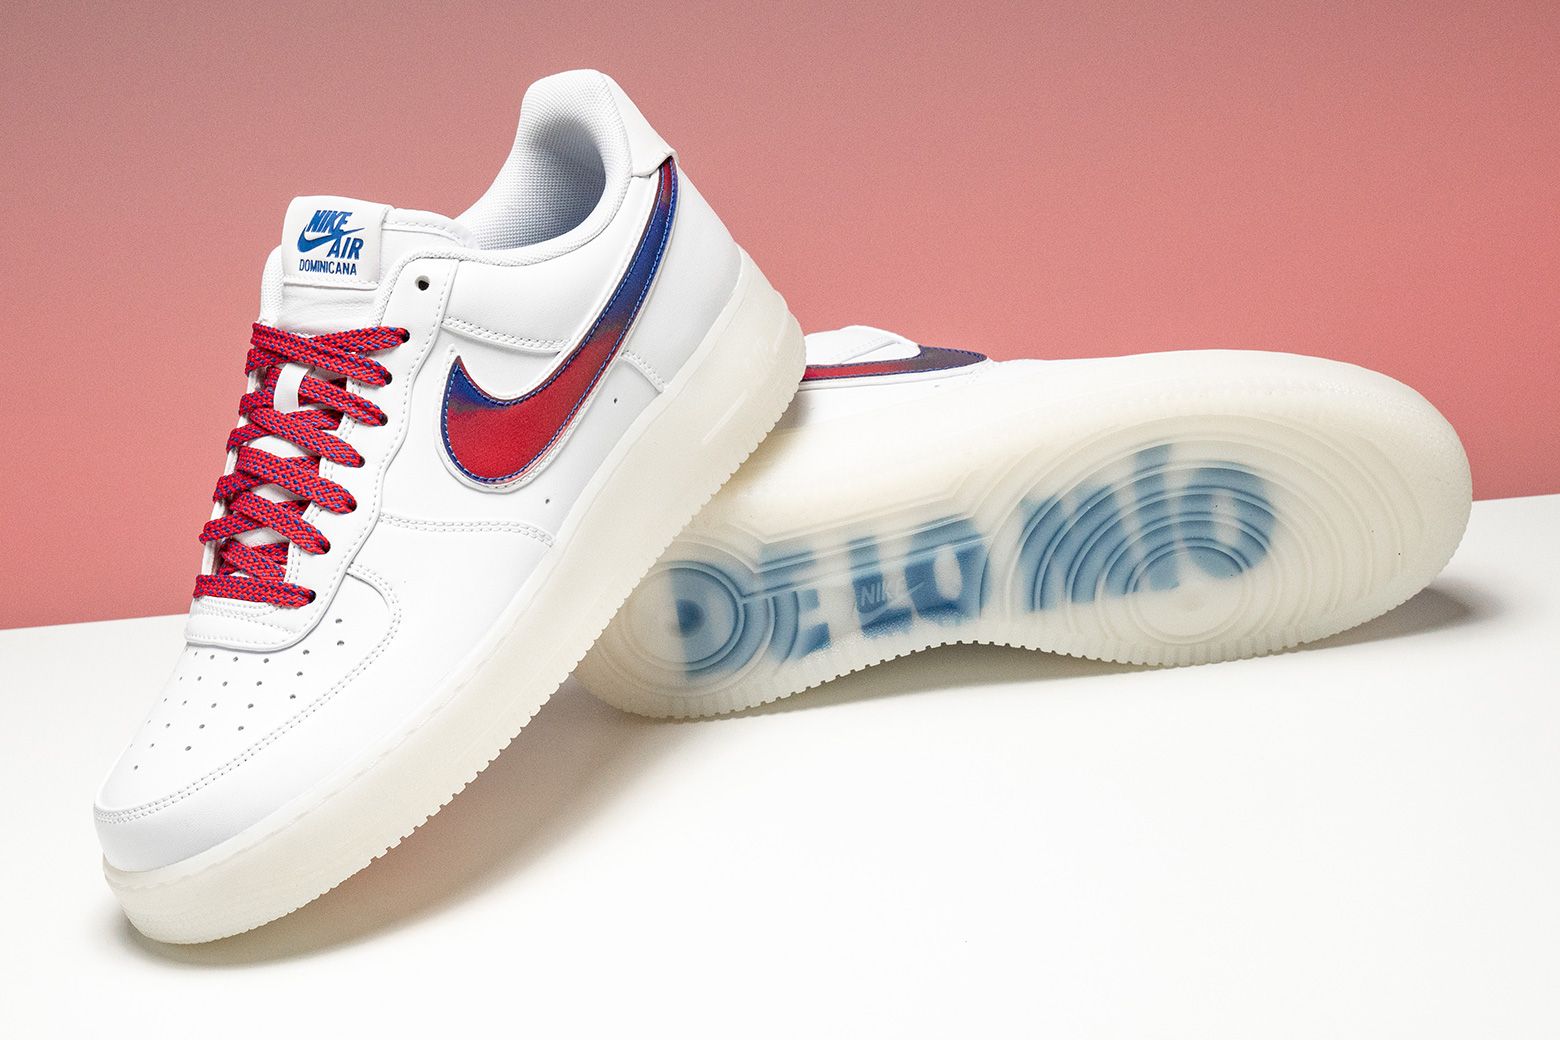 Stadium Goods on Twitter: "Since it debuted in 1982, Air Force 1 has a staple of New York City style. It became so synonymous with the city that it was